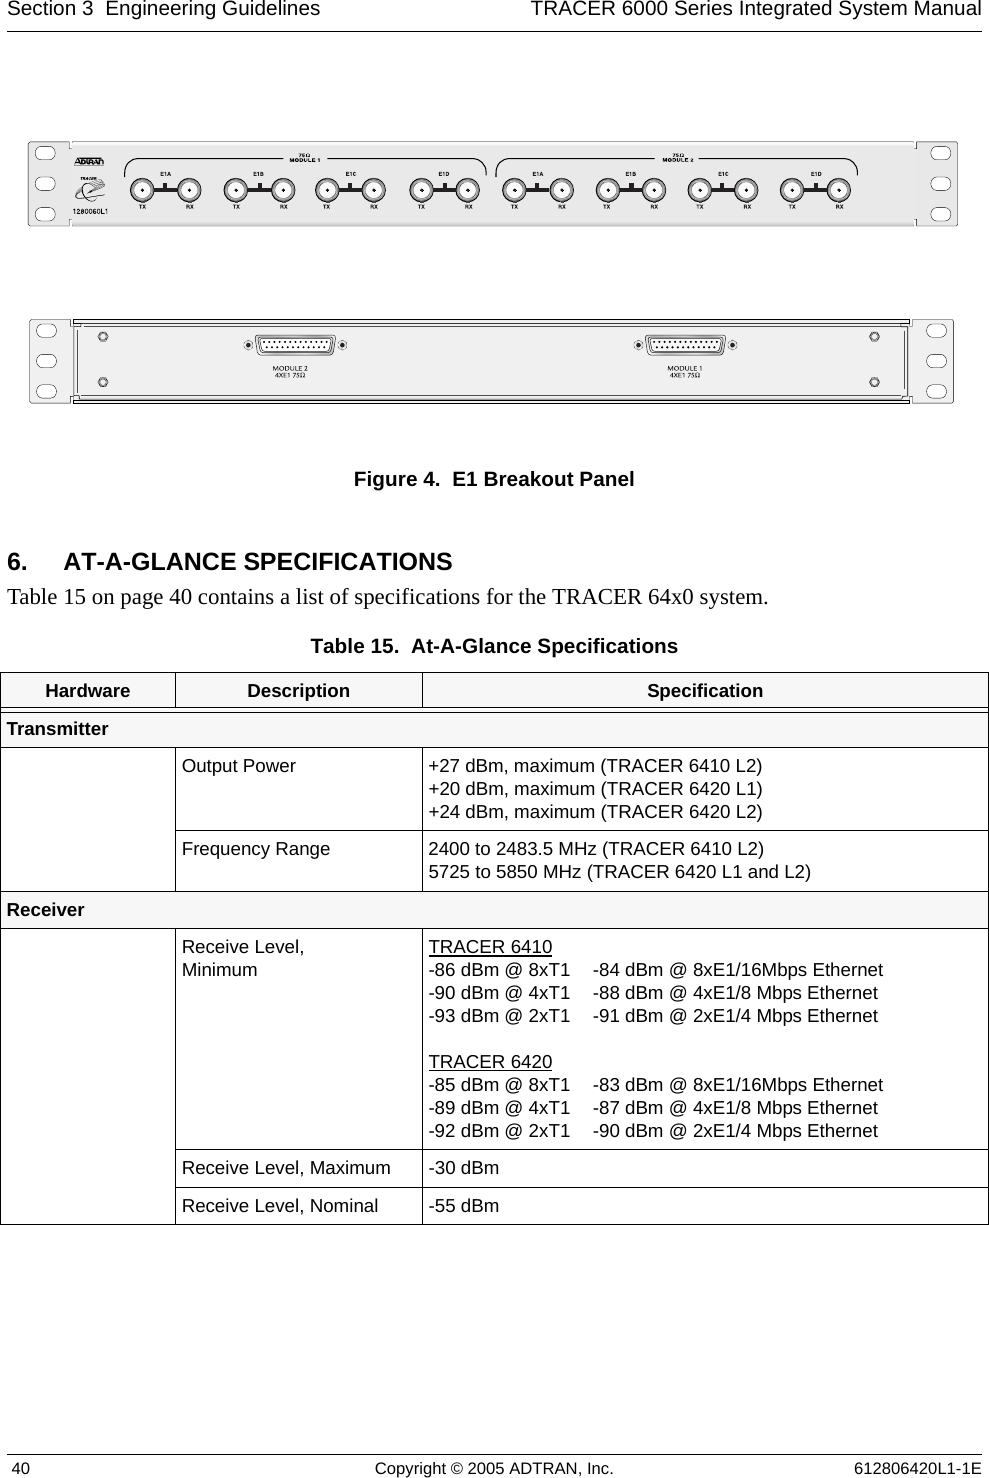 Section 3  Engineering Guidelines TRACER 6000 Series Integrated System Manual 40 Copyright © 2005 ADTRAN, Inc. 612806420L1-1EFigure 4.  E1 Breakout Panel6. AT-A-GLANCE SPECIFICATIONSTable 15 on page 40 contains a list of specifications for the TRACER 64x0 system.Table 15.  At-A-Glance Specifications  Hardware Description SpecificationTransmitterOutput Power +27 dBm, maximum (TRACER 6410 L2)+20 dBm, maximum (TRACER 6420 L1)+24 dBm, maximum (TRACER 6420 L2)Frequency Range 2400 to 2483.5 MHz (TRACER 6410 L2)5725 to 5850 MHz (TRACER 6420 L1 and L2)ReceiverReceive Level, MinimumTRACER 6410-86 dBm @ 8xT1 -90 dBm @ 4xT1-93 dBm @ 2xT1TRACER 6420-85 dBm @ 8xT1 -89 dBm @ 4xT1-92 dBm @ 2xT1-84 dBm @ 8xE1/16Mbps Ethernet-88 dBm @ 4xE1/8 Mbps Ethernet-91 dBm @ 2xE1/4 Mbps Ethernet-83 dBm @ 8xE1/16Mbps Ethernet-87 dBm @ 4xE1/8 Mbps Ethernet-90 dBm @ 2xE1/4 Mbps EthernetReceive Level, Maximum -30 dBm Receive Level, Nominal -55 dBm 